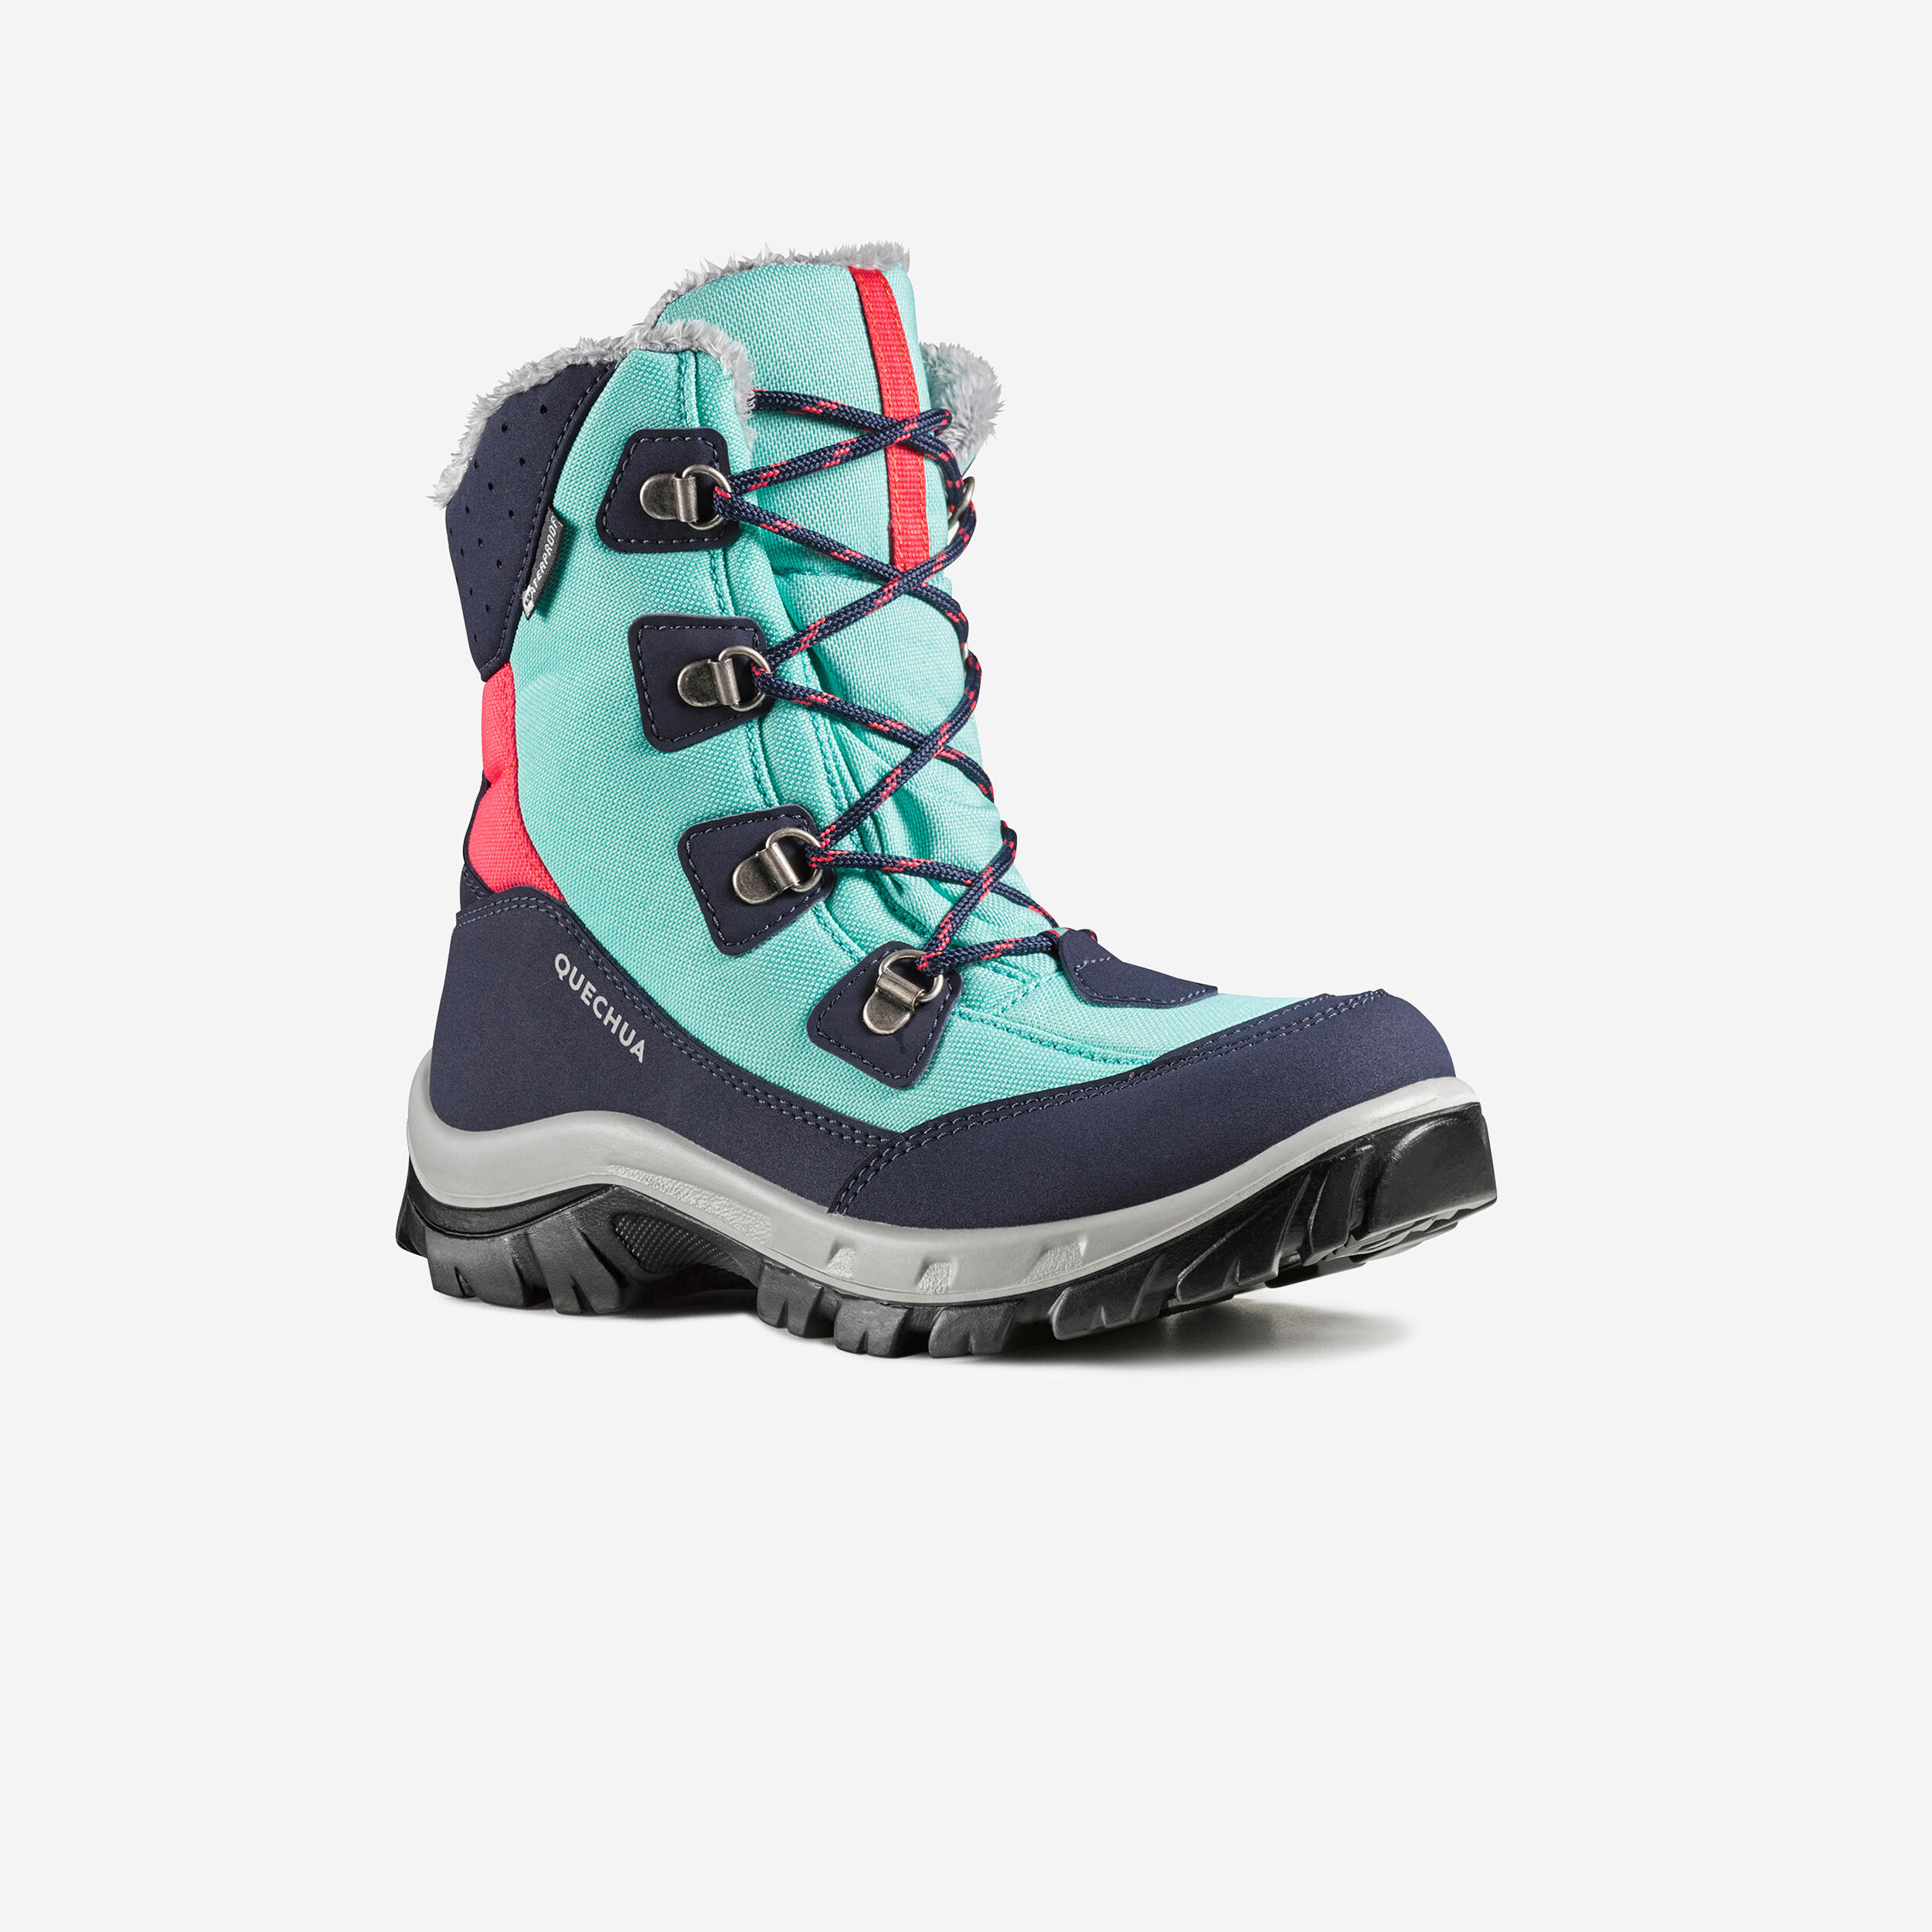 WATERPROOF SNOW HIKING BOOTS SIZE 